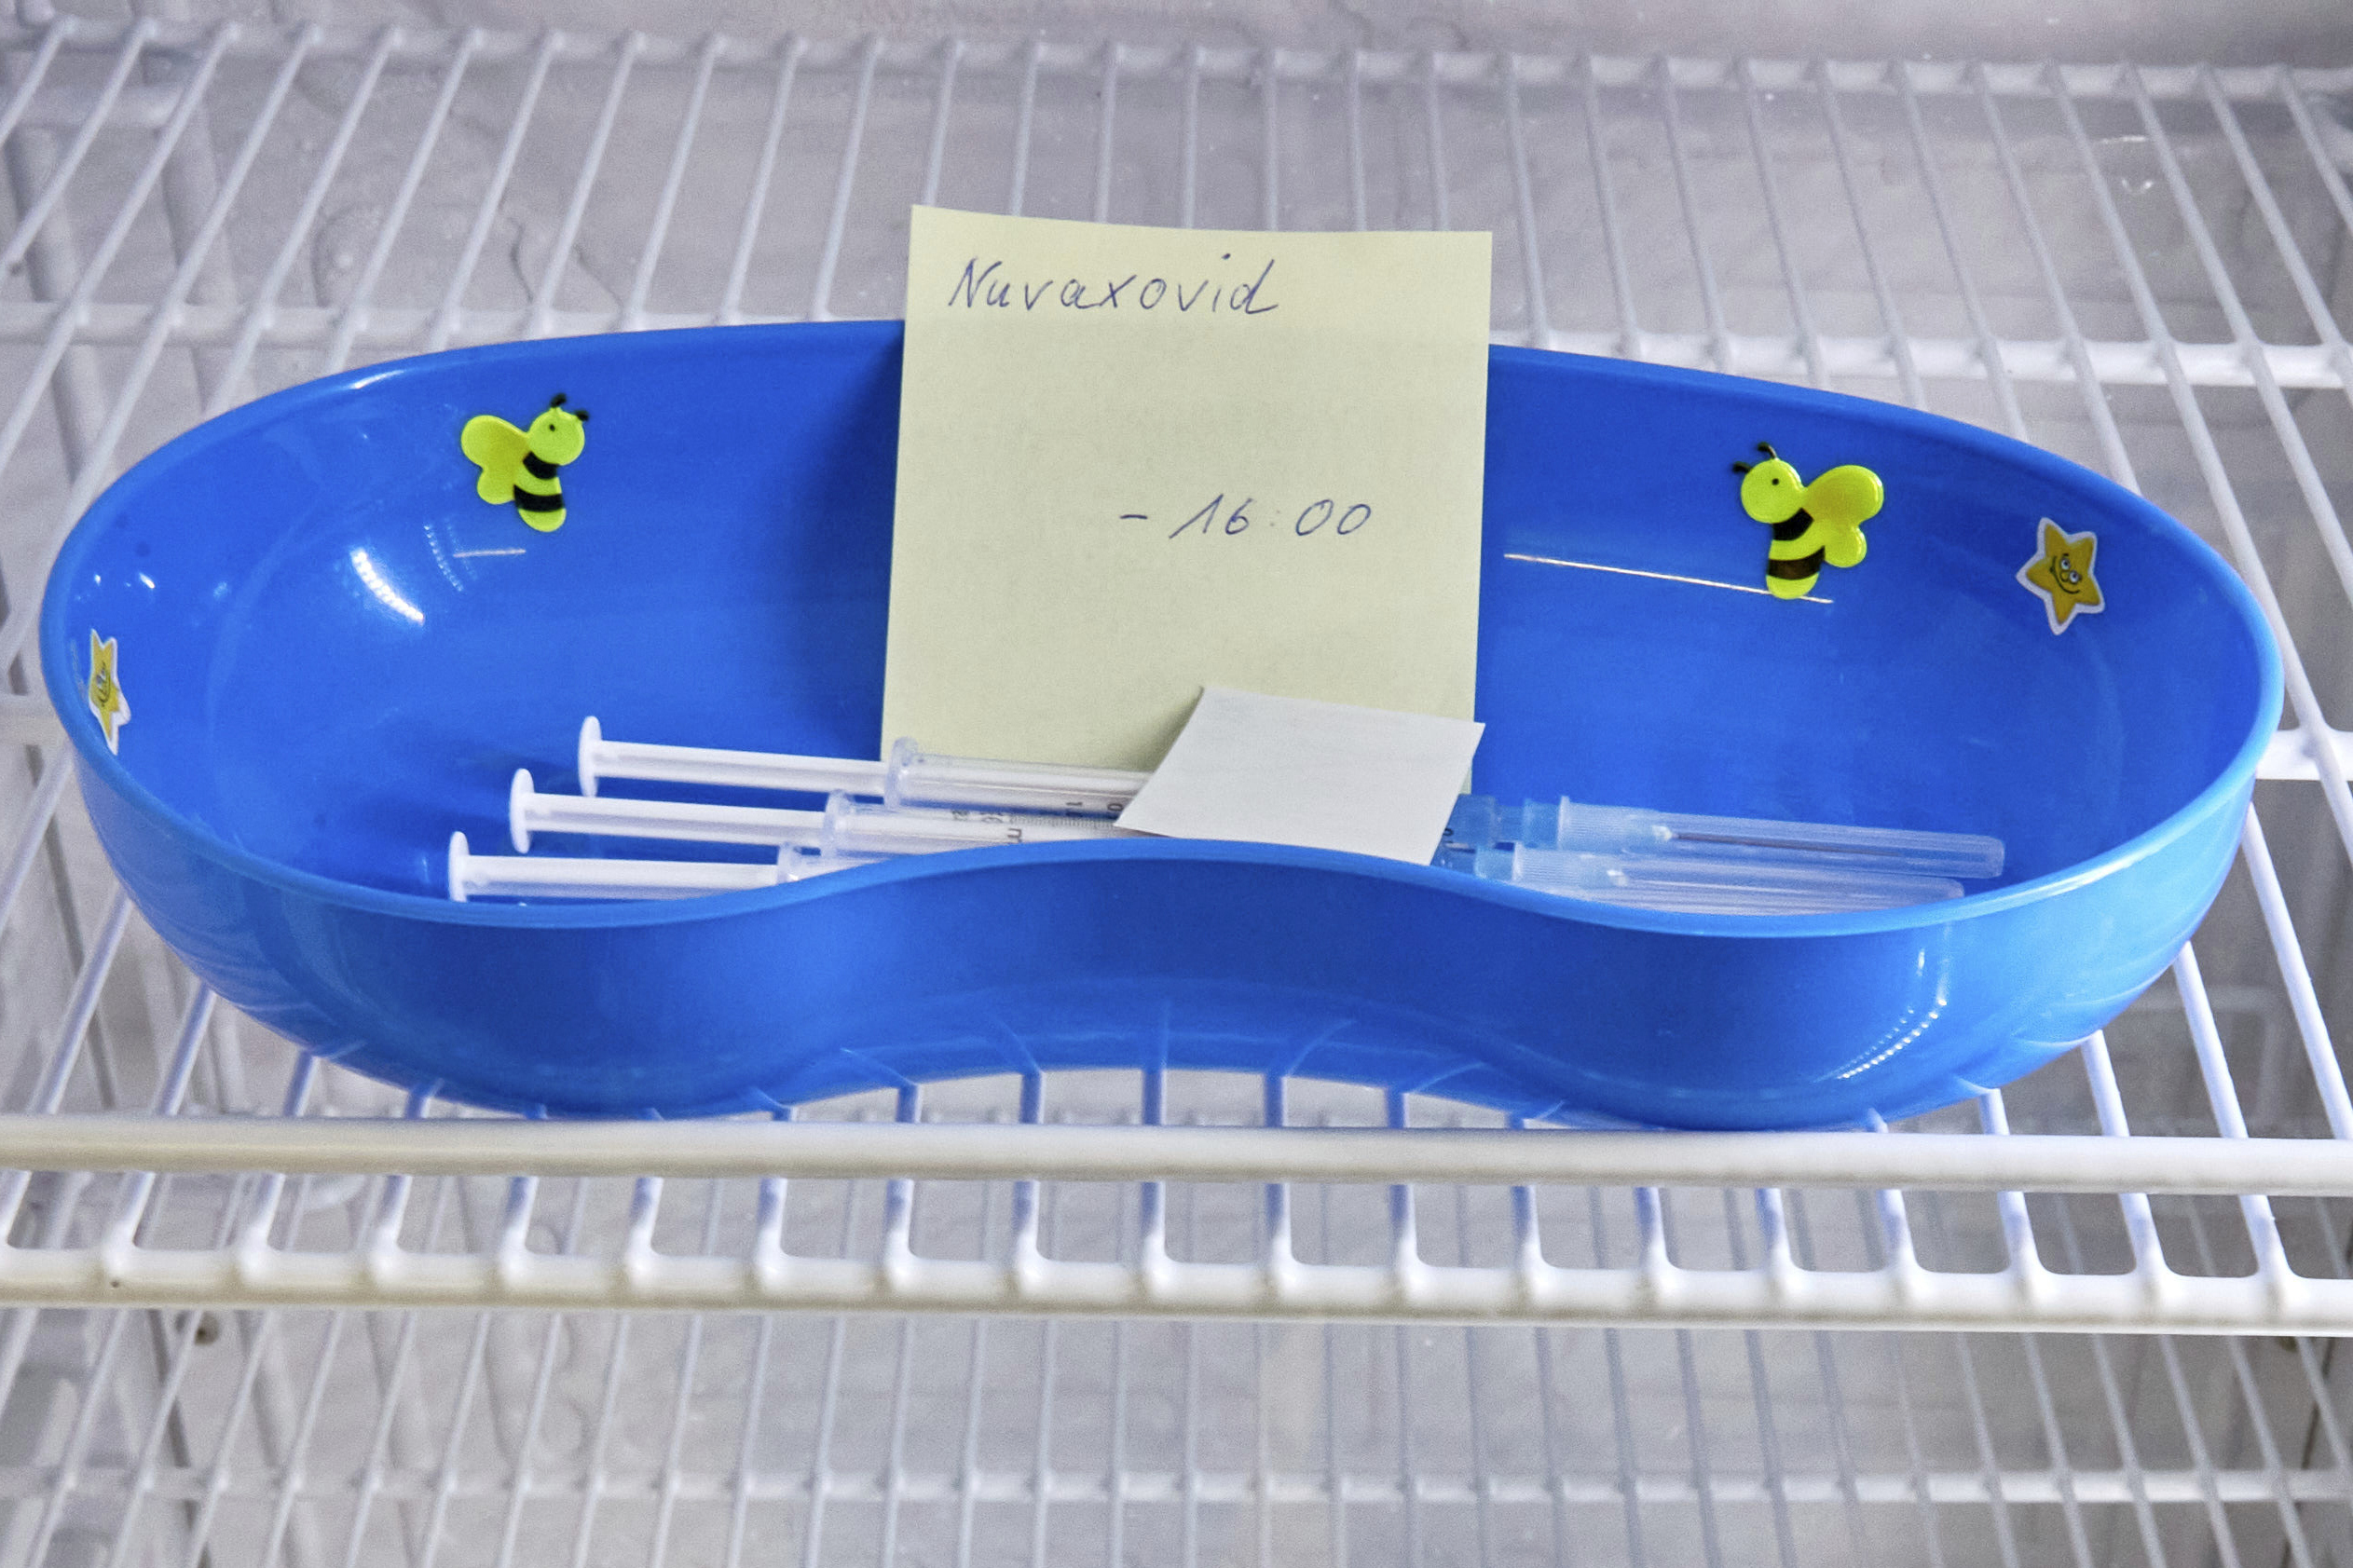 FILE - A kidney dish with syringes containing the Novavax COVID-19 vaccine sits in a refrigerator ready for use at a vaccination center in Prisdorf, Germany, Saturday, Feb. 26, 2022. On Tuesday, July 19, 2022, a U.S. Centers for Disease Control and Prevention advisory panel recommended the shots and final action will come from the agency's director. (Georg Wendt/dpa via AP, File)